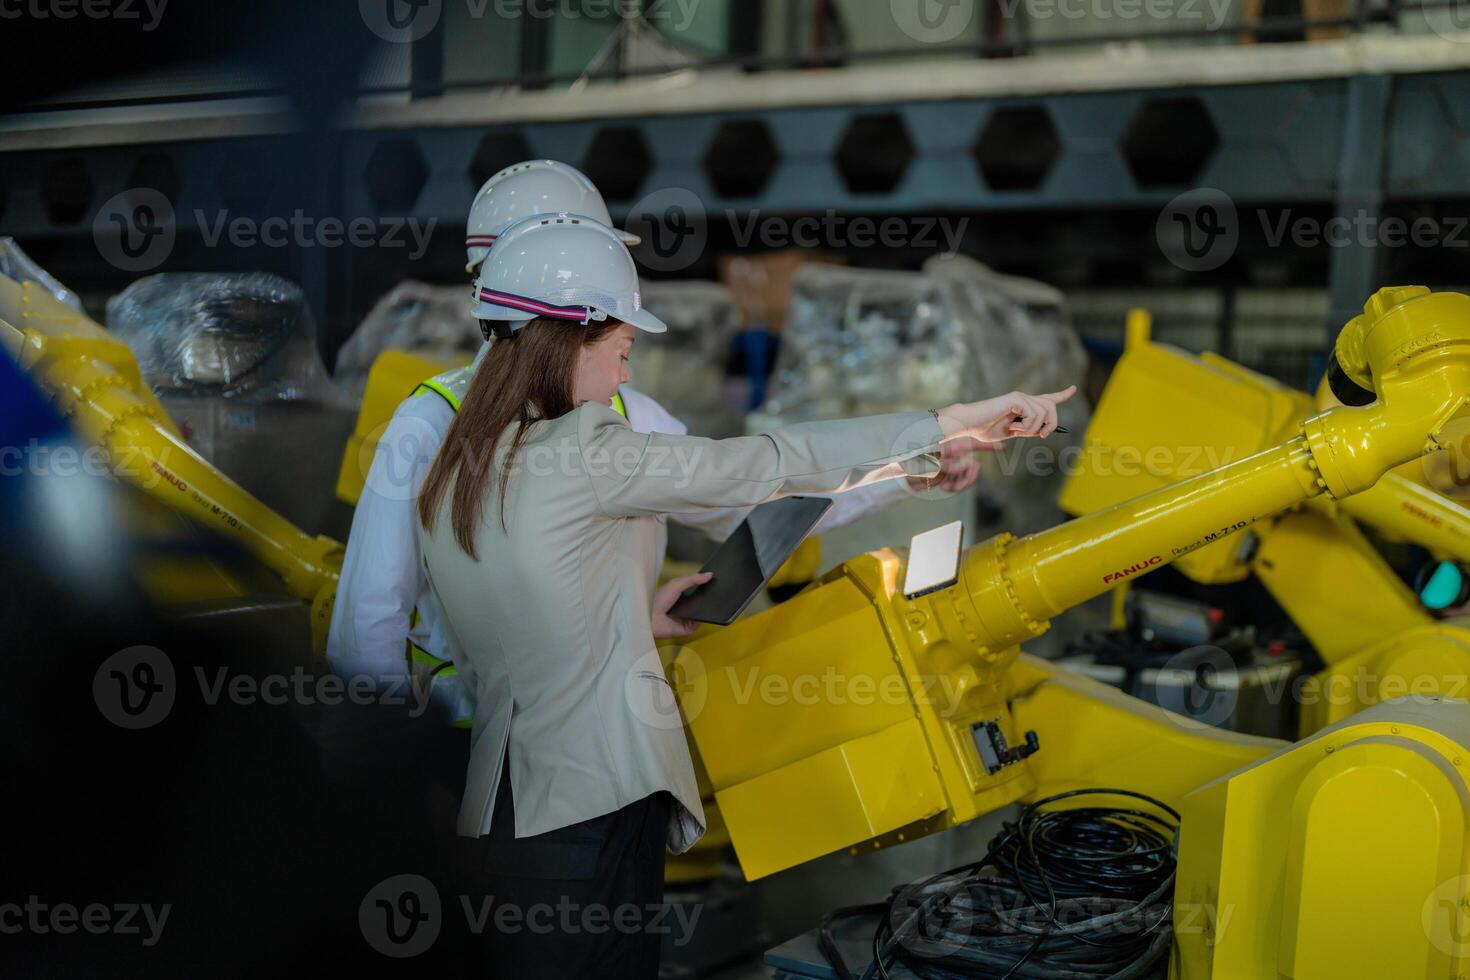 Factory engineers inspecting on machine with smart tablet. Worker works at heavy machine robot arm. The welding machine with a remote system in an industrial factory. Artificial intelligence concept. photo